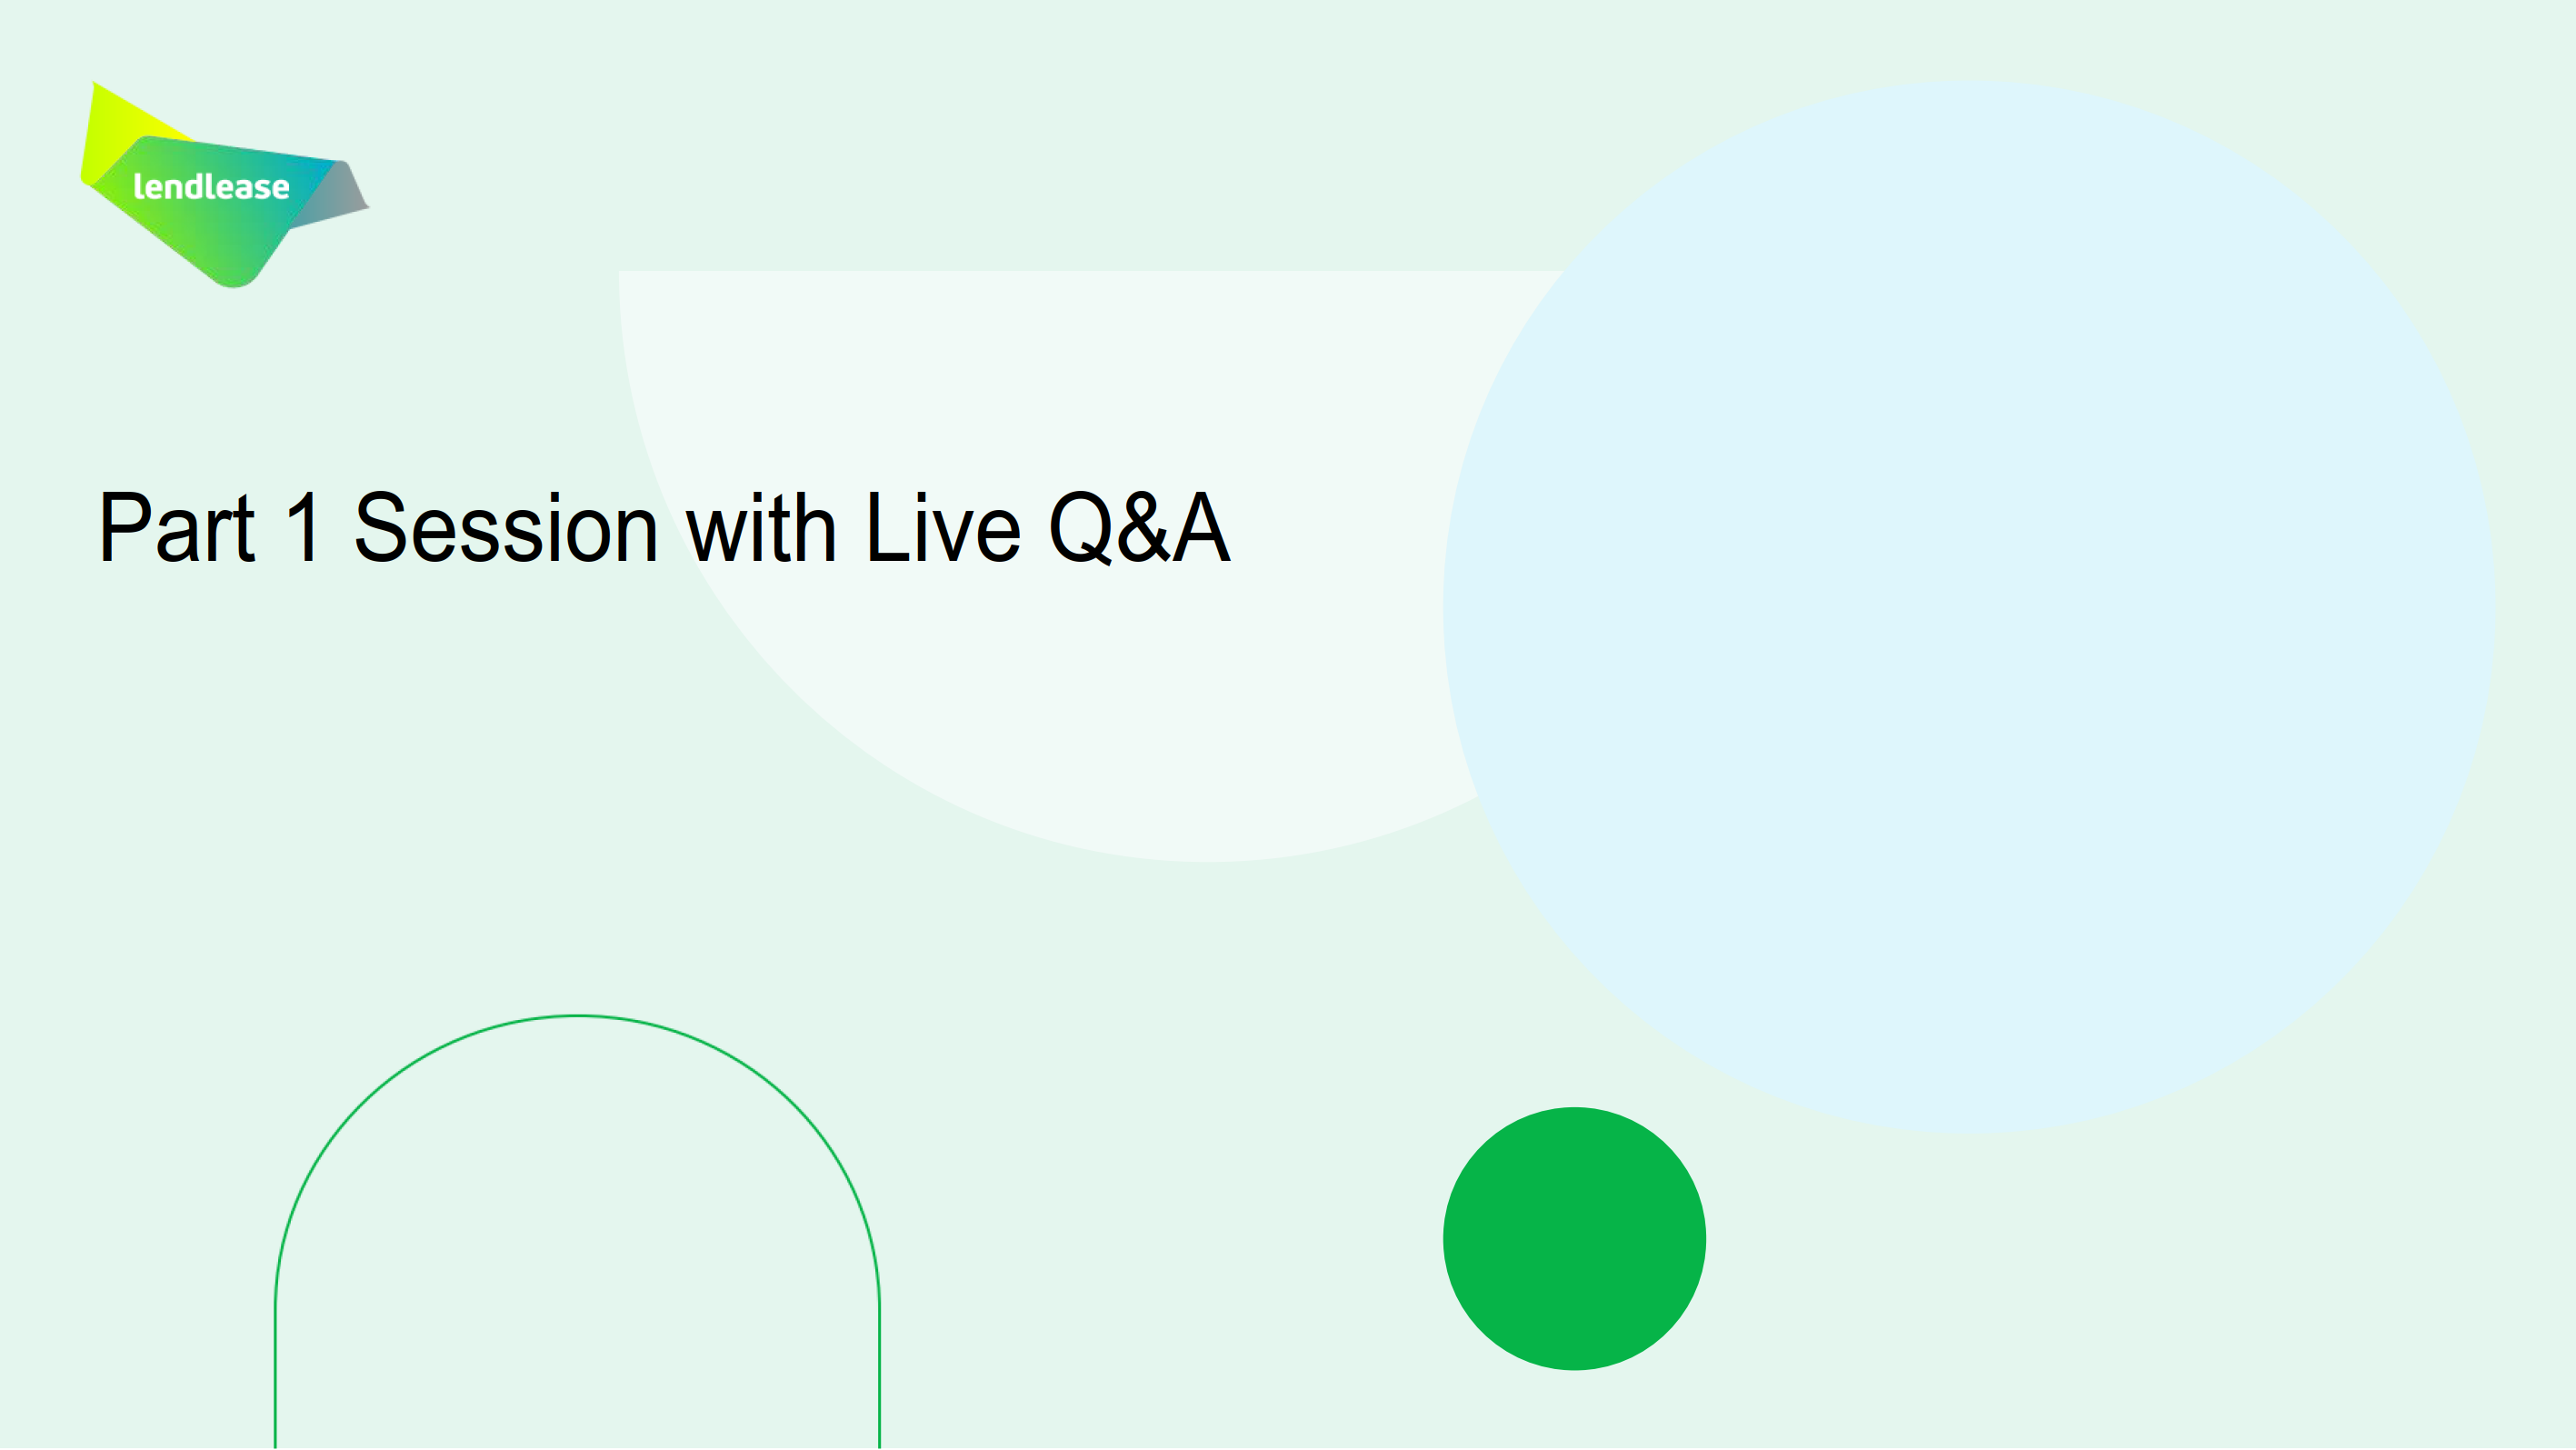 Part 1 Session with Live Q&A